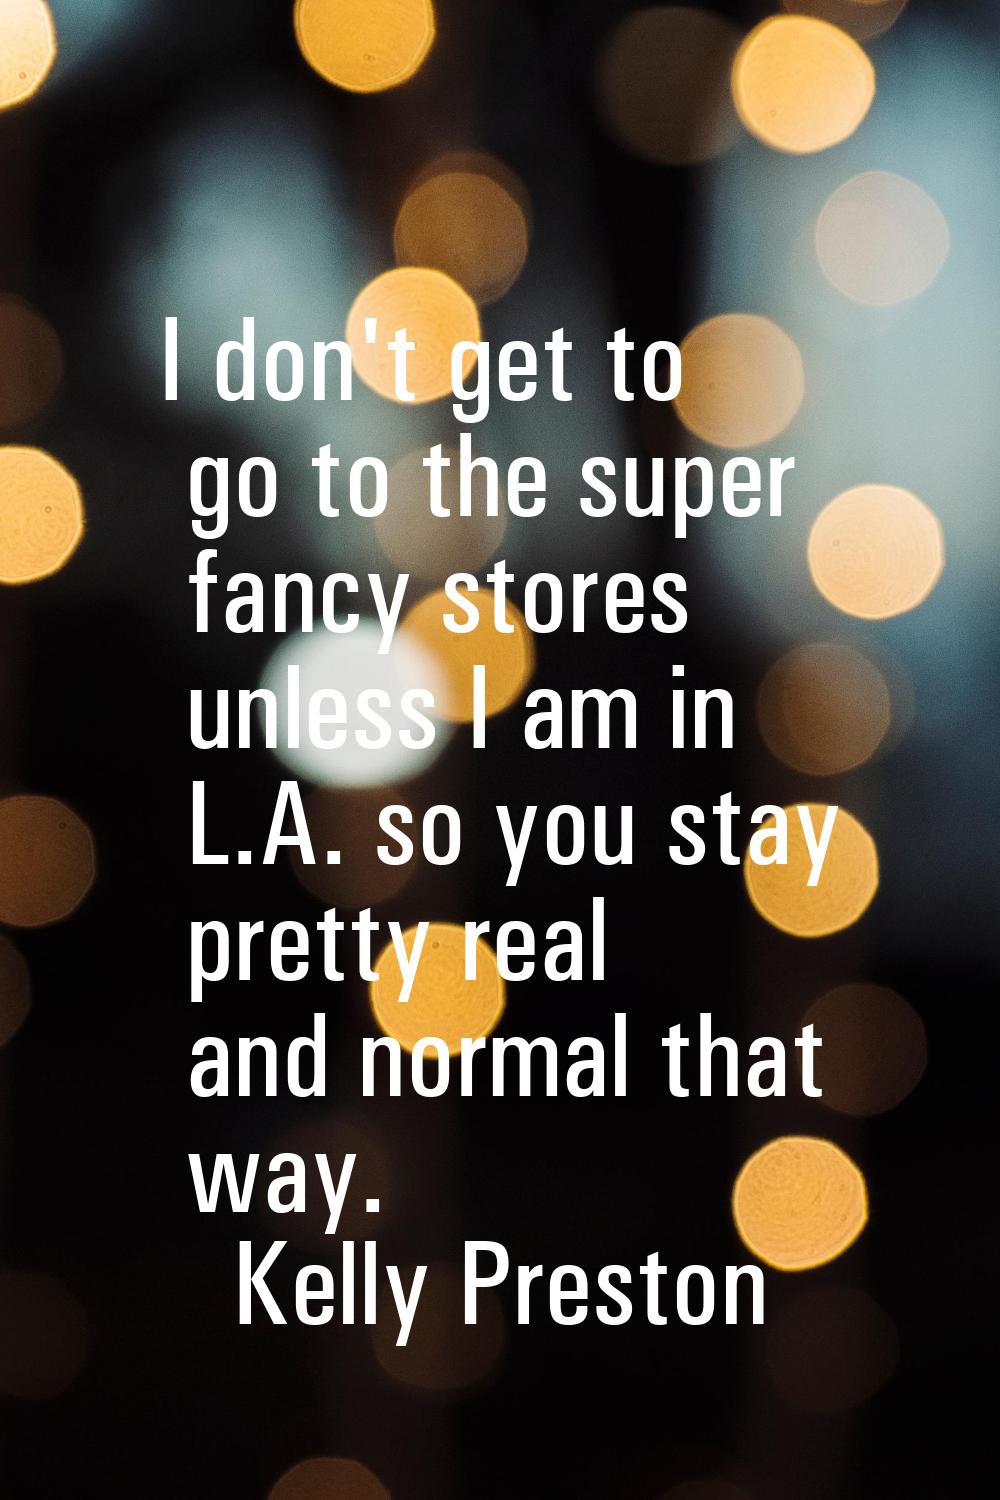 I don't get to go to the super fancy stores unless I am in L.A. so you stay pretty real and normal 